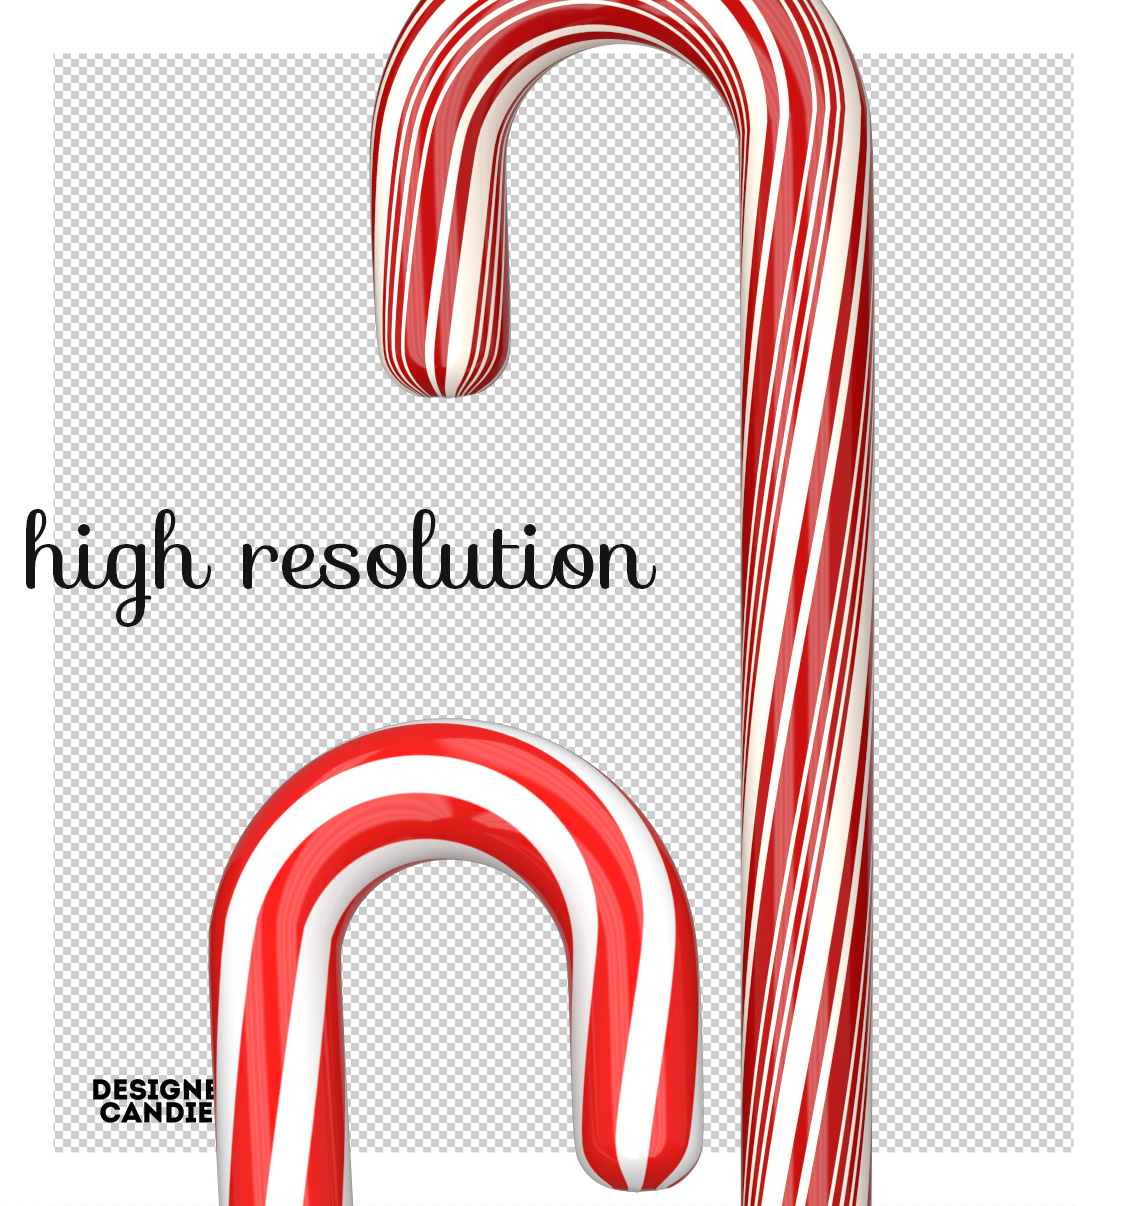 High Resolution Candy Cane Renders